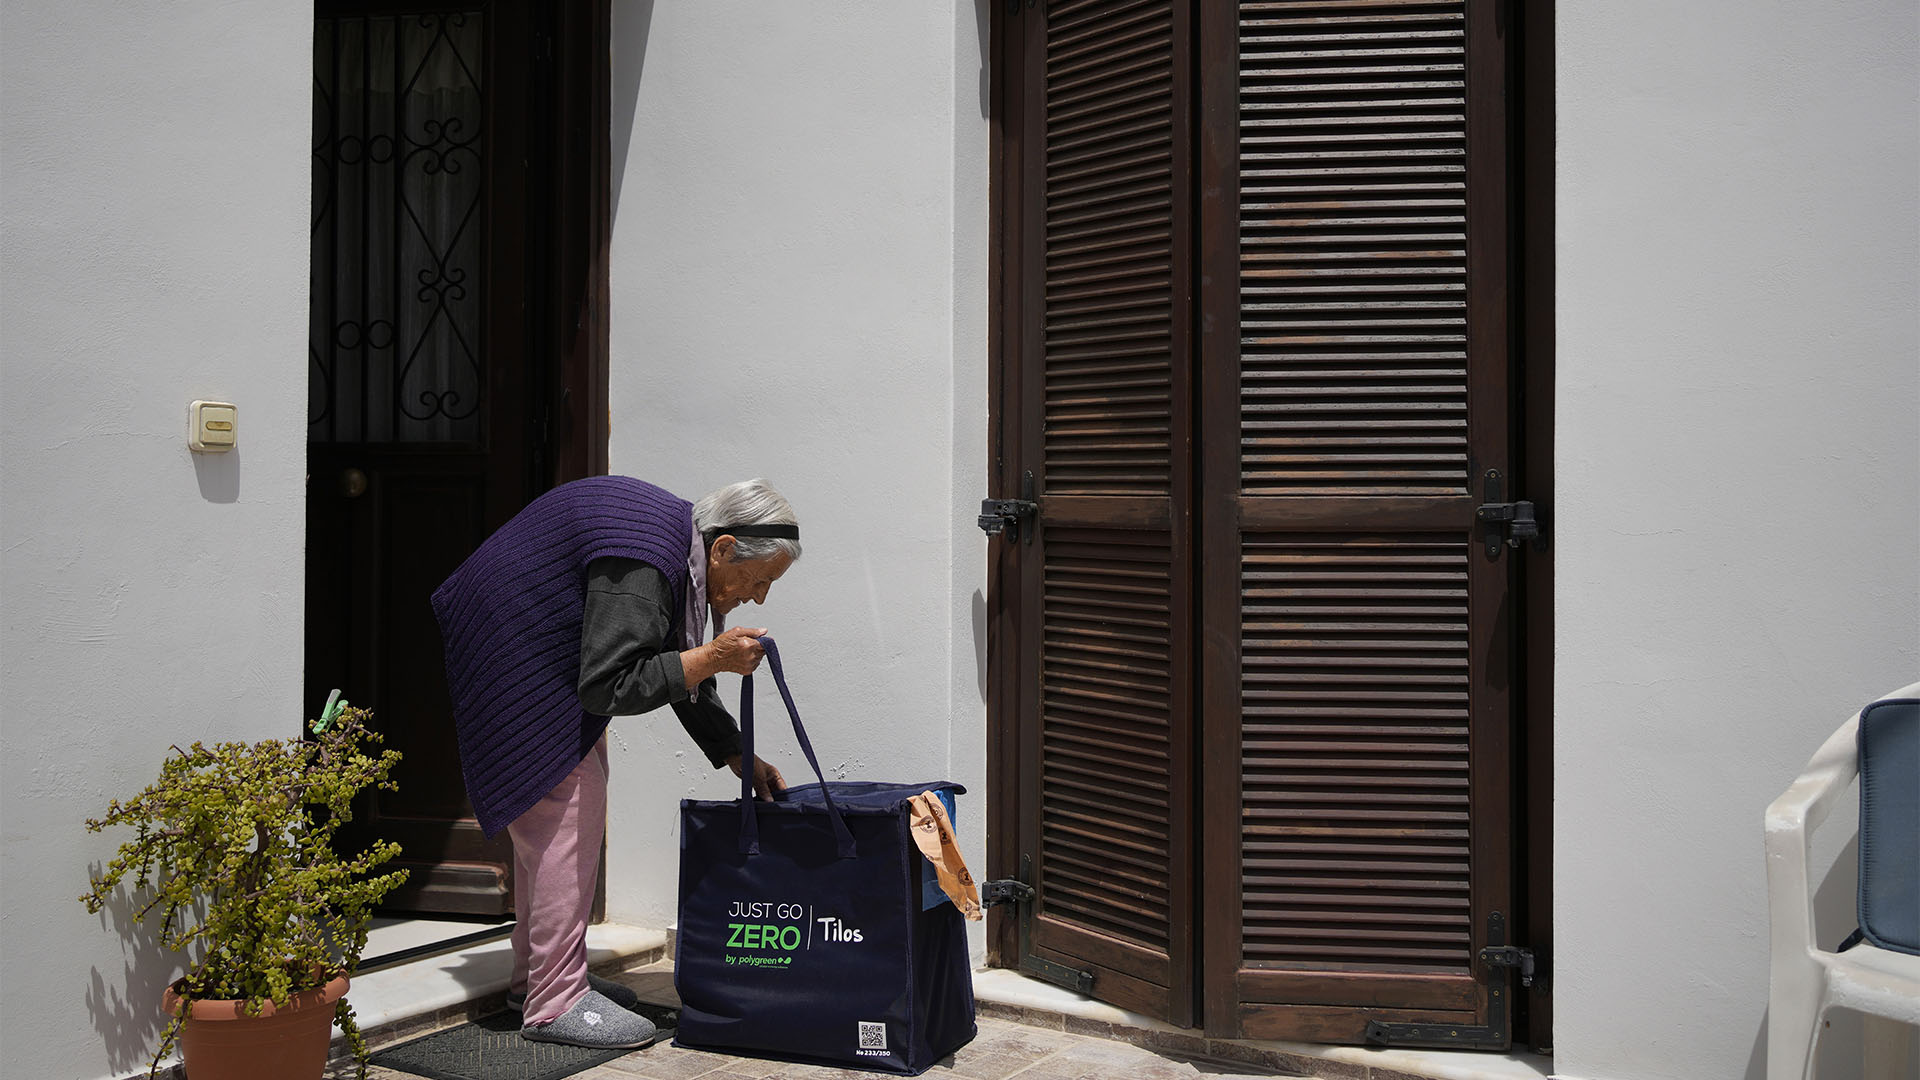 An elderly woman picks up a recycling bag after workers picked up trash from her home (AP Photo/Thanassis Stavrakis)